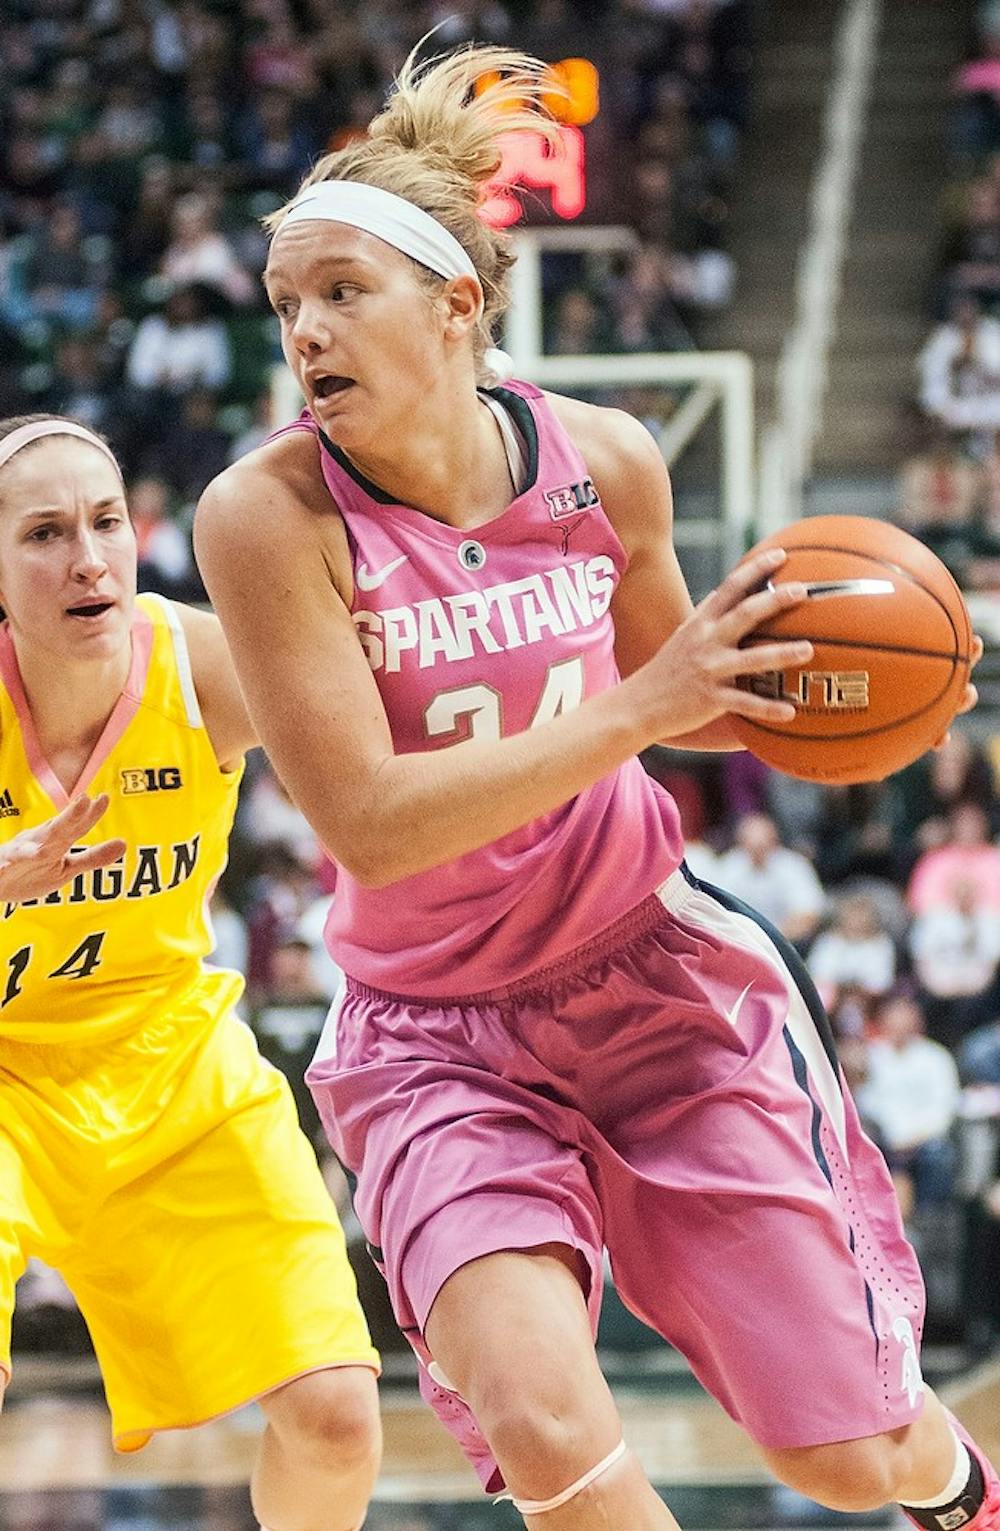 	<p>Senior forward Courtney Schiffauer drives the ball toward the basket Monday, Feb. 4, 2013, at Breslin Center. The Spartans defeated Michigan, 61&#8212;46, improving their record to 6-3 in the Big Ten. Adam Toolin/The State News</p>